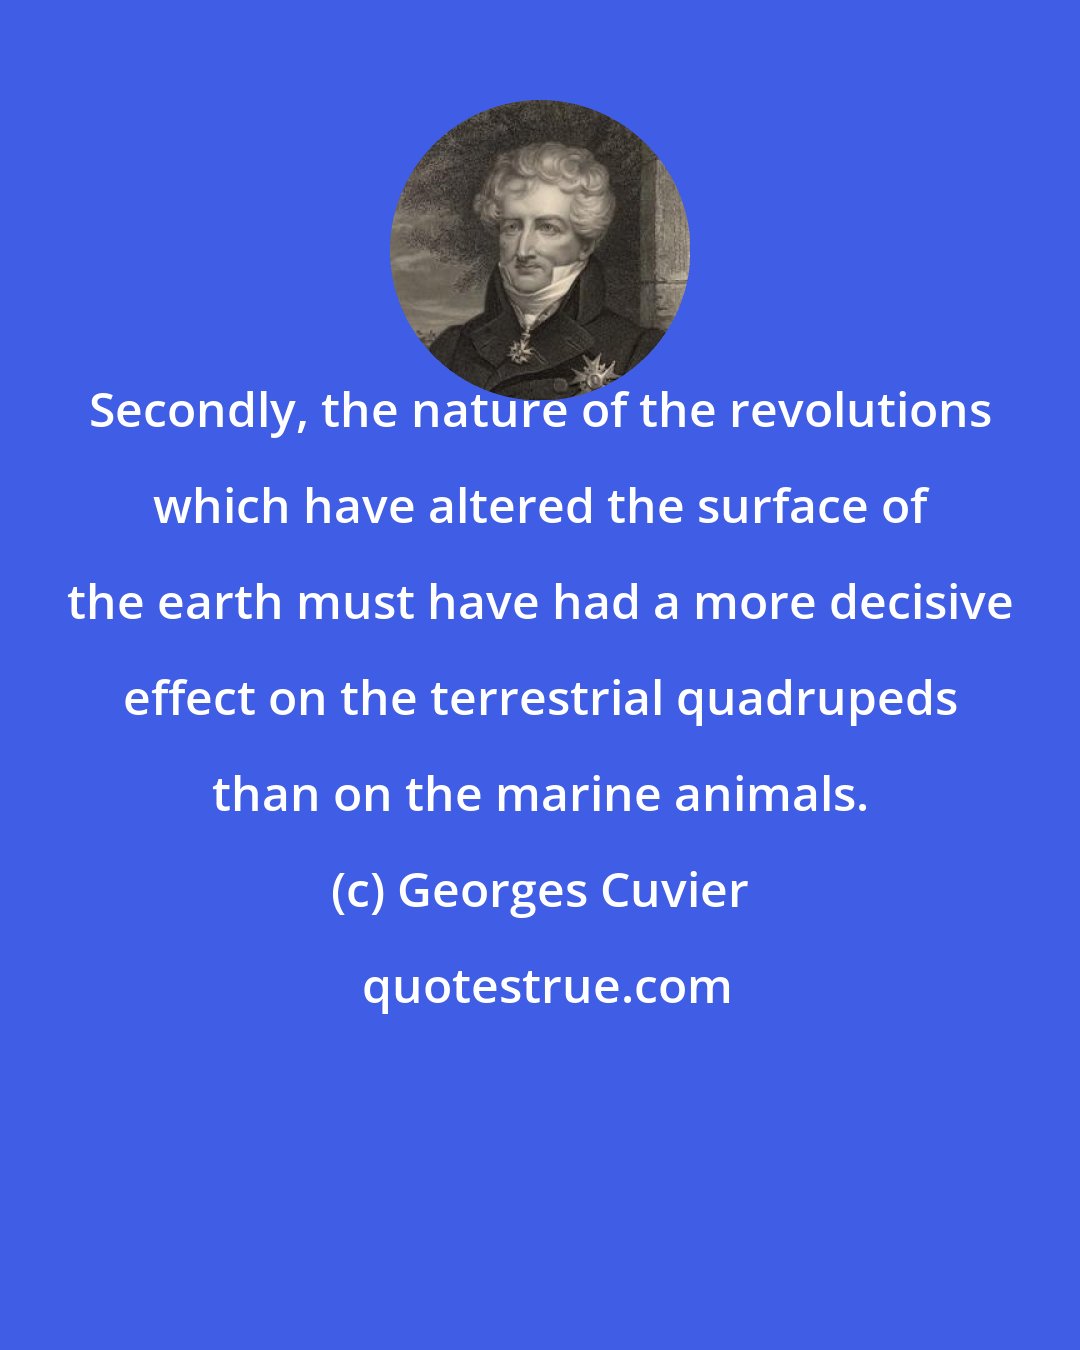 Georges Cuvier: Secondly, the nature of the revolutions which have altered the surface of the earth must have had a more decisive effect on the terrestrial quadrupeds than on the marine animals.